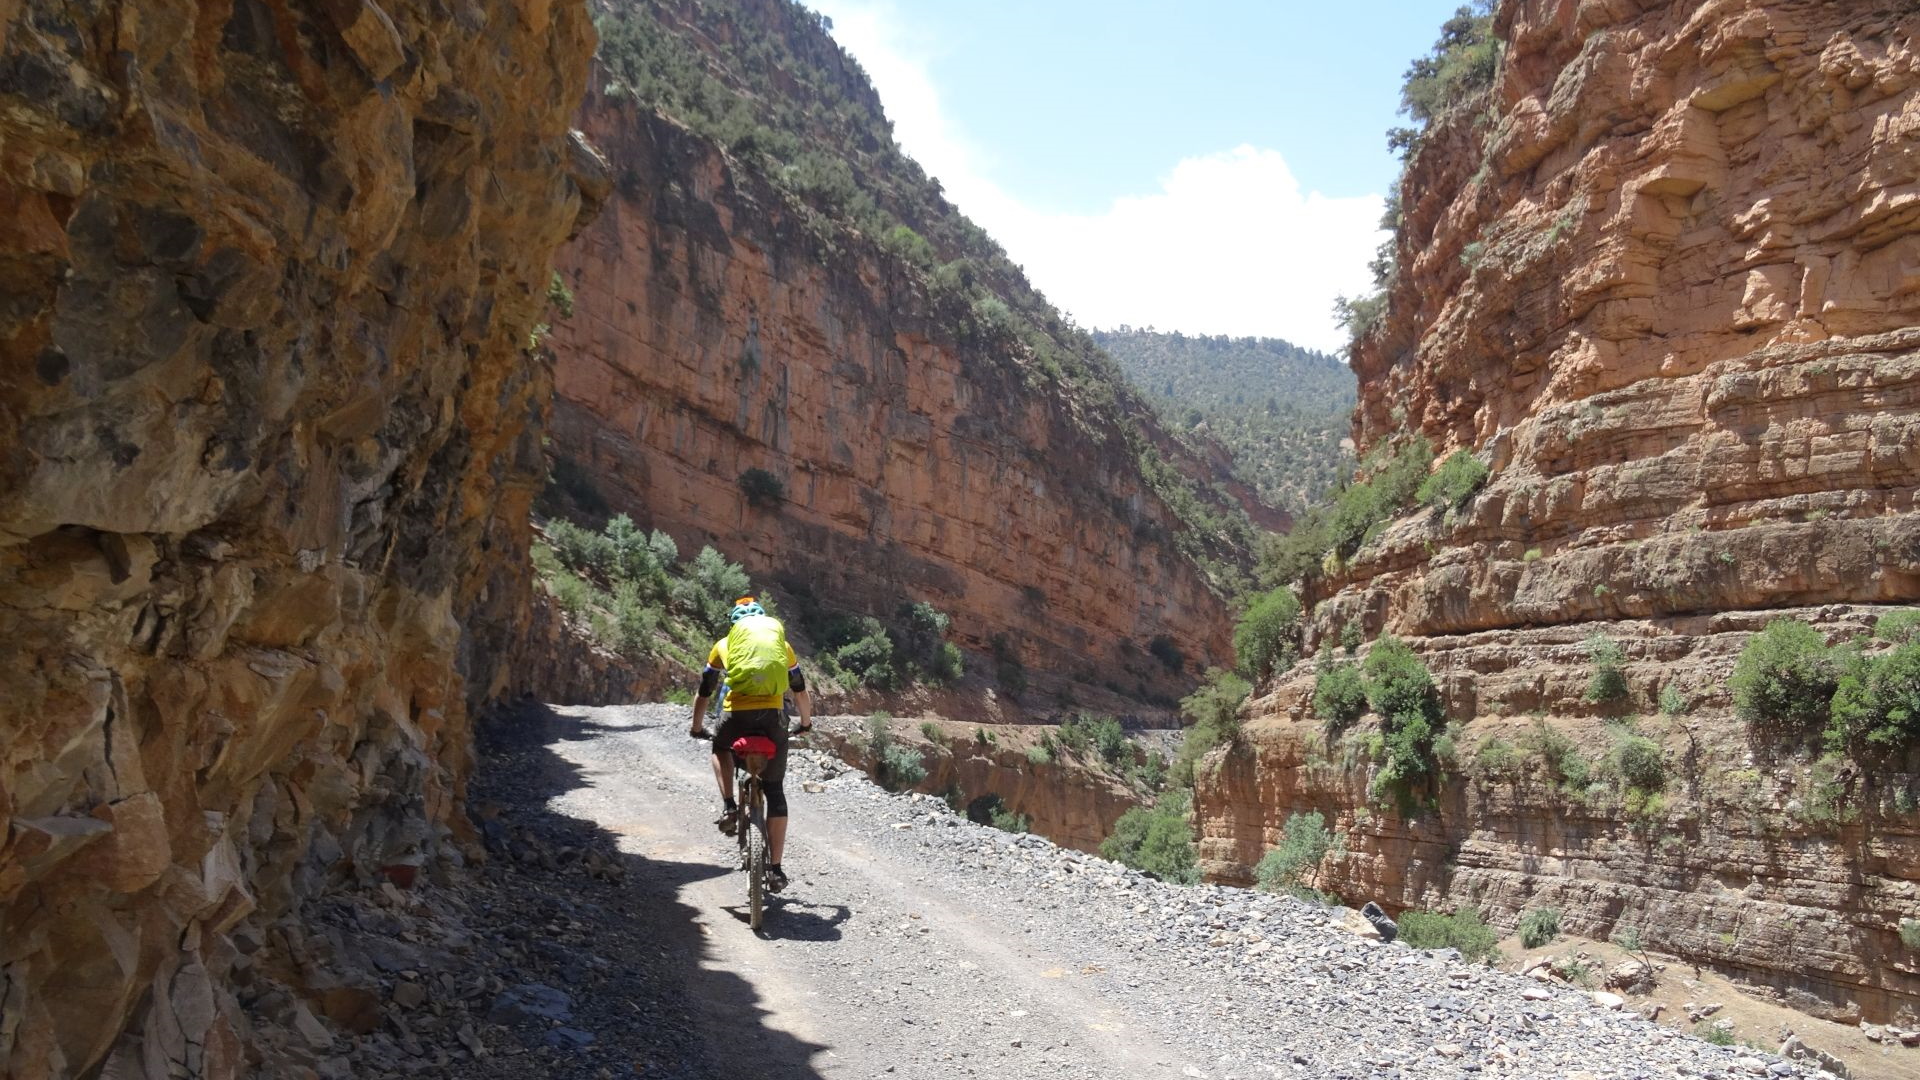 Riding through the stunning Assif Melloul Gorge, in Morocco. Taken on "Day 2" of our 2-week, unsupported traverse of the High Atlas in 2015